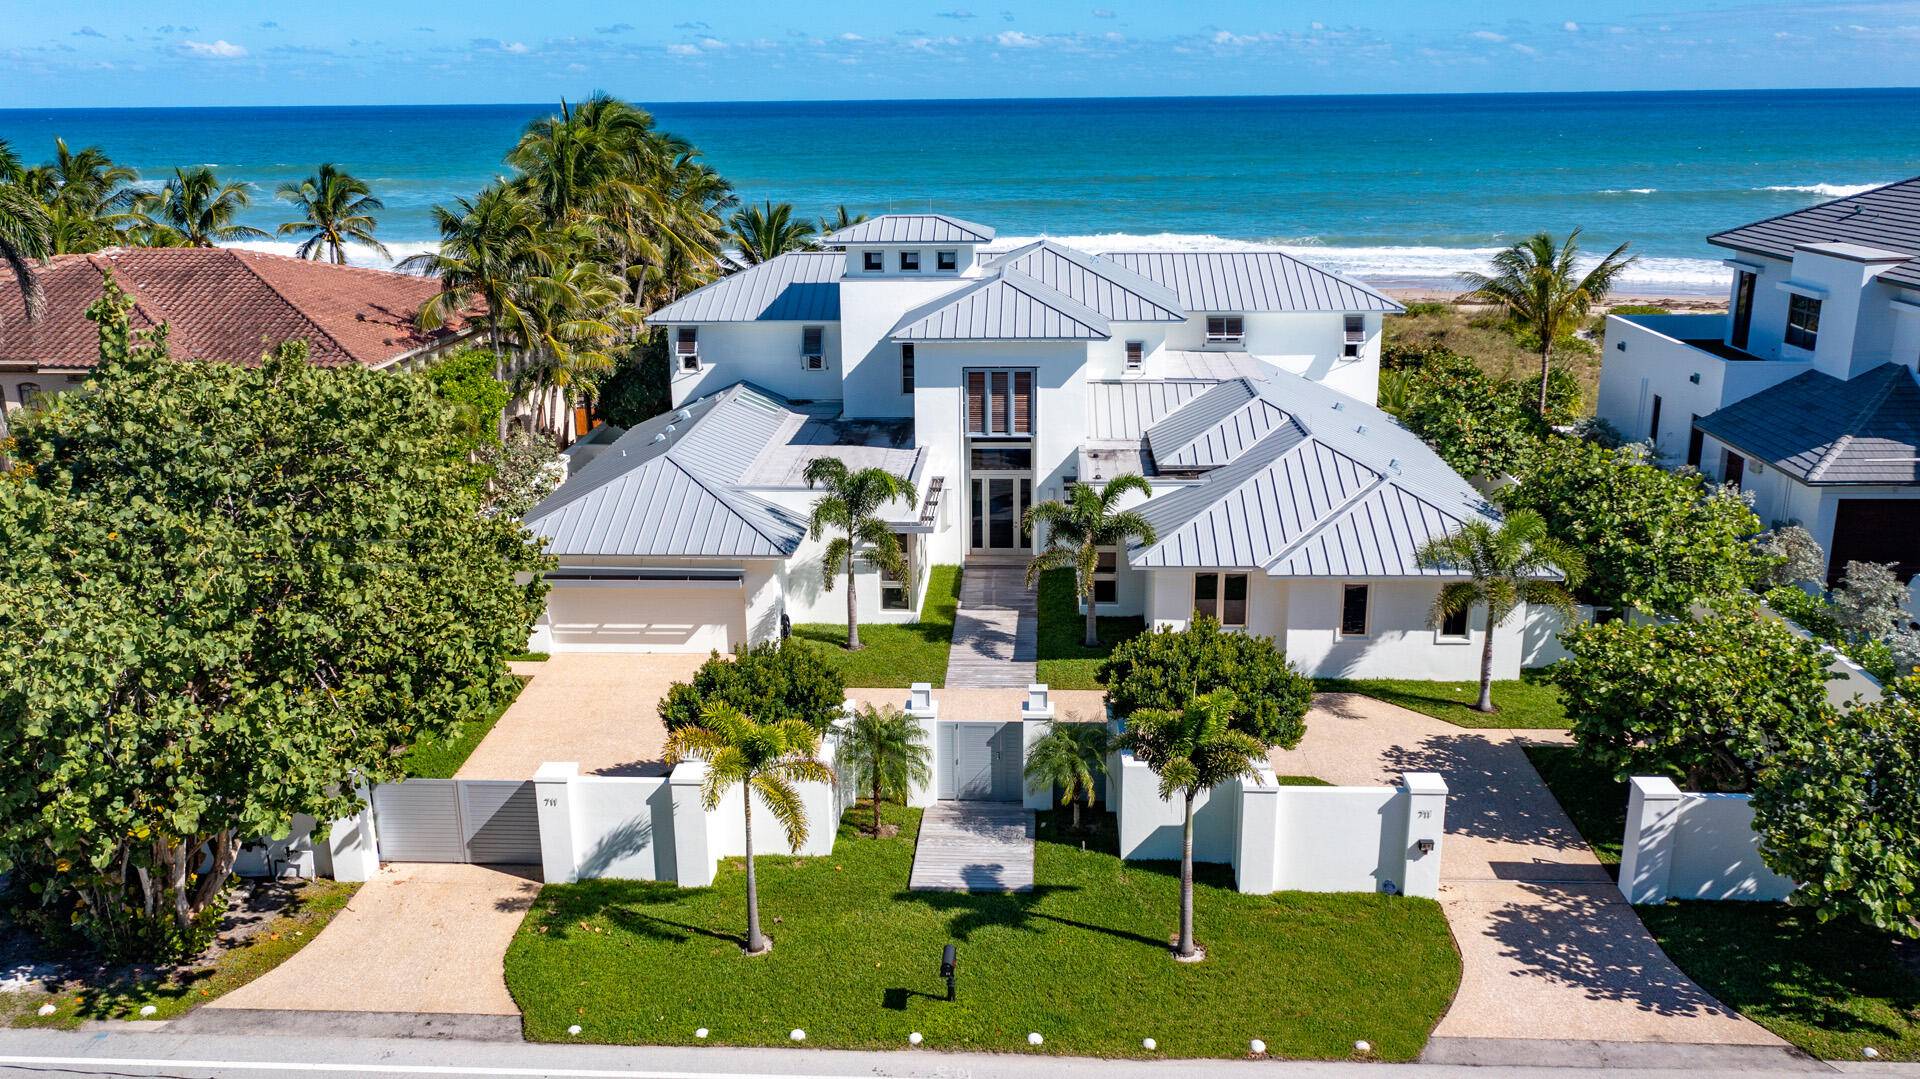 Zen Chic Beach House is sited on lushly landscaped half acre with 110 feet directly on the oceanfront.